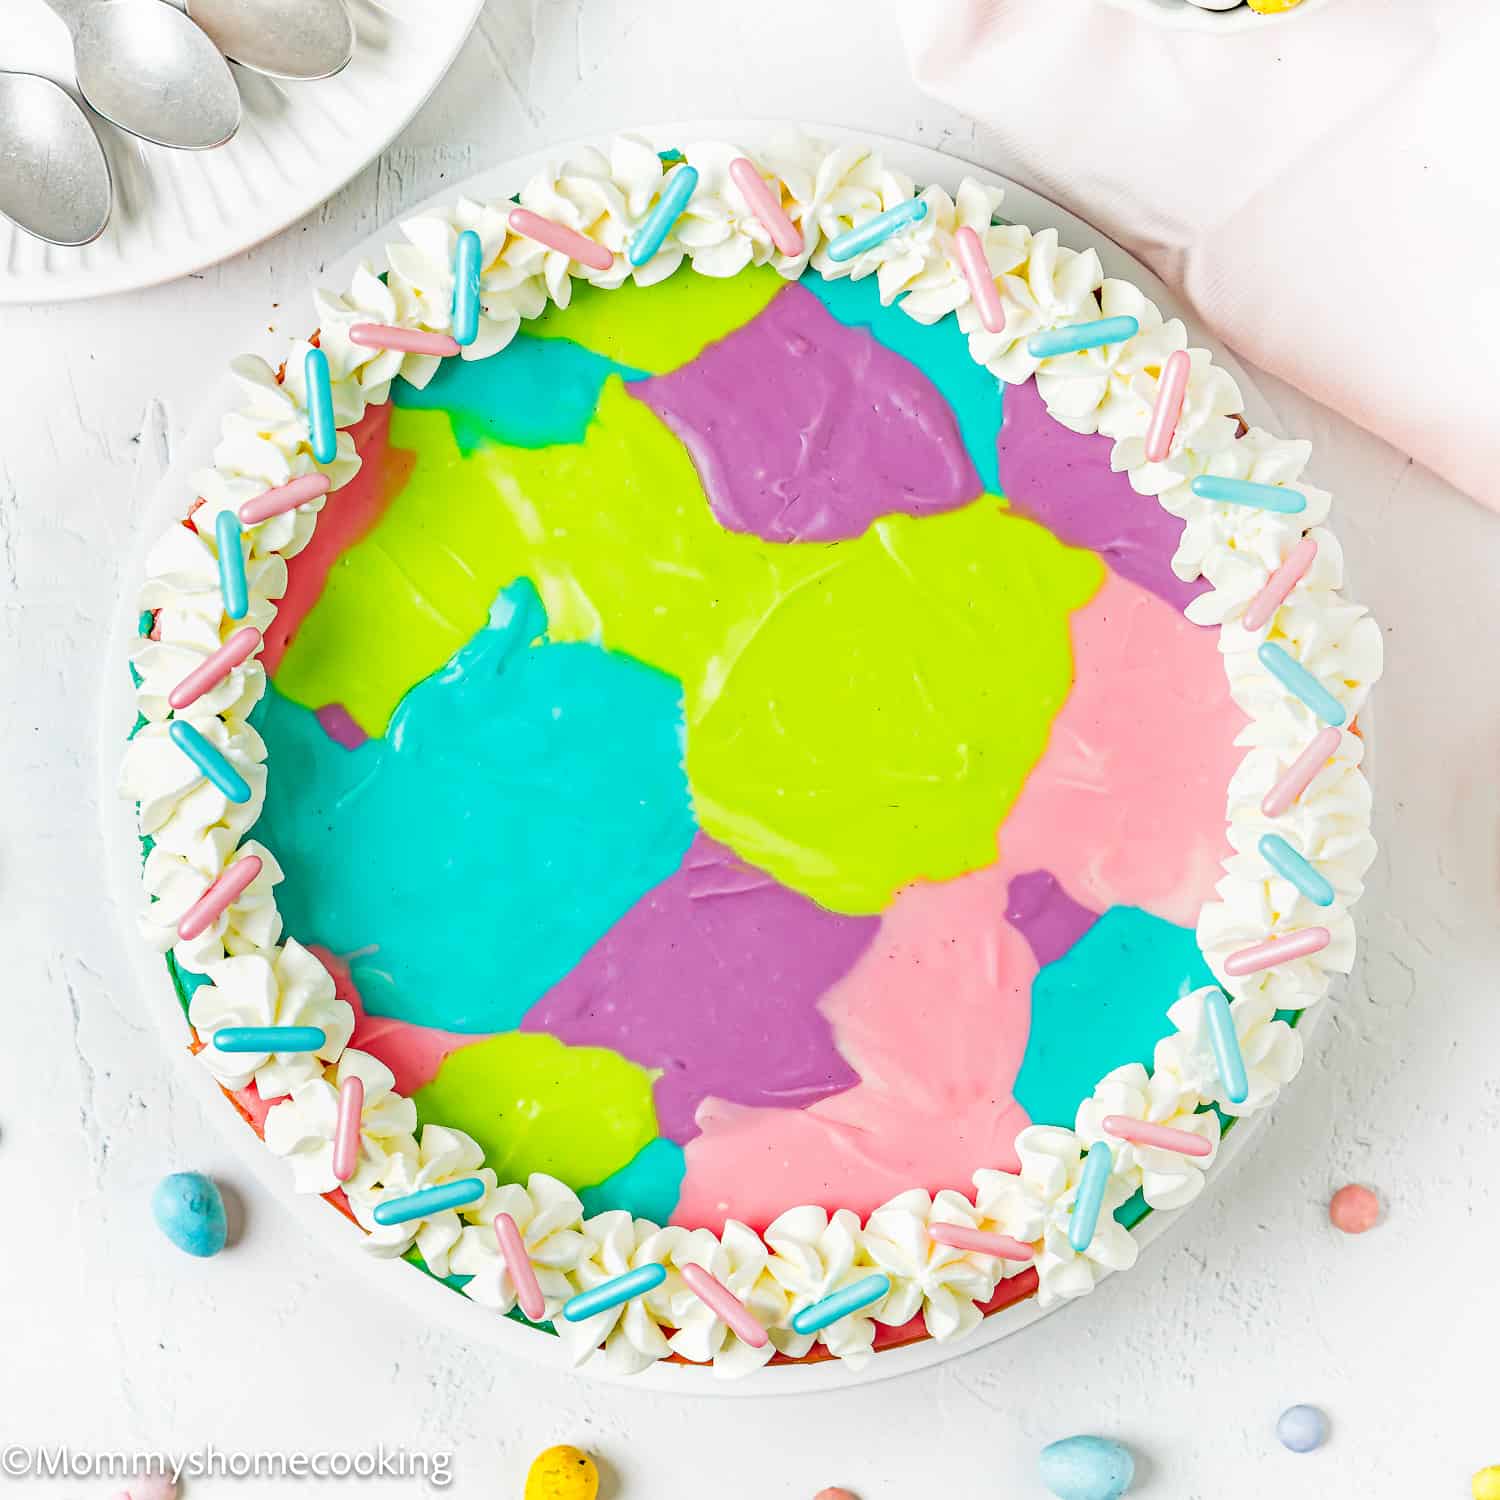 Easy Baked Easter Cheesecake (Egg-free) over a white surface with chocolate eggs and sprinkles.